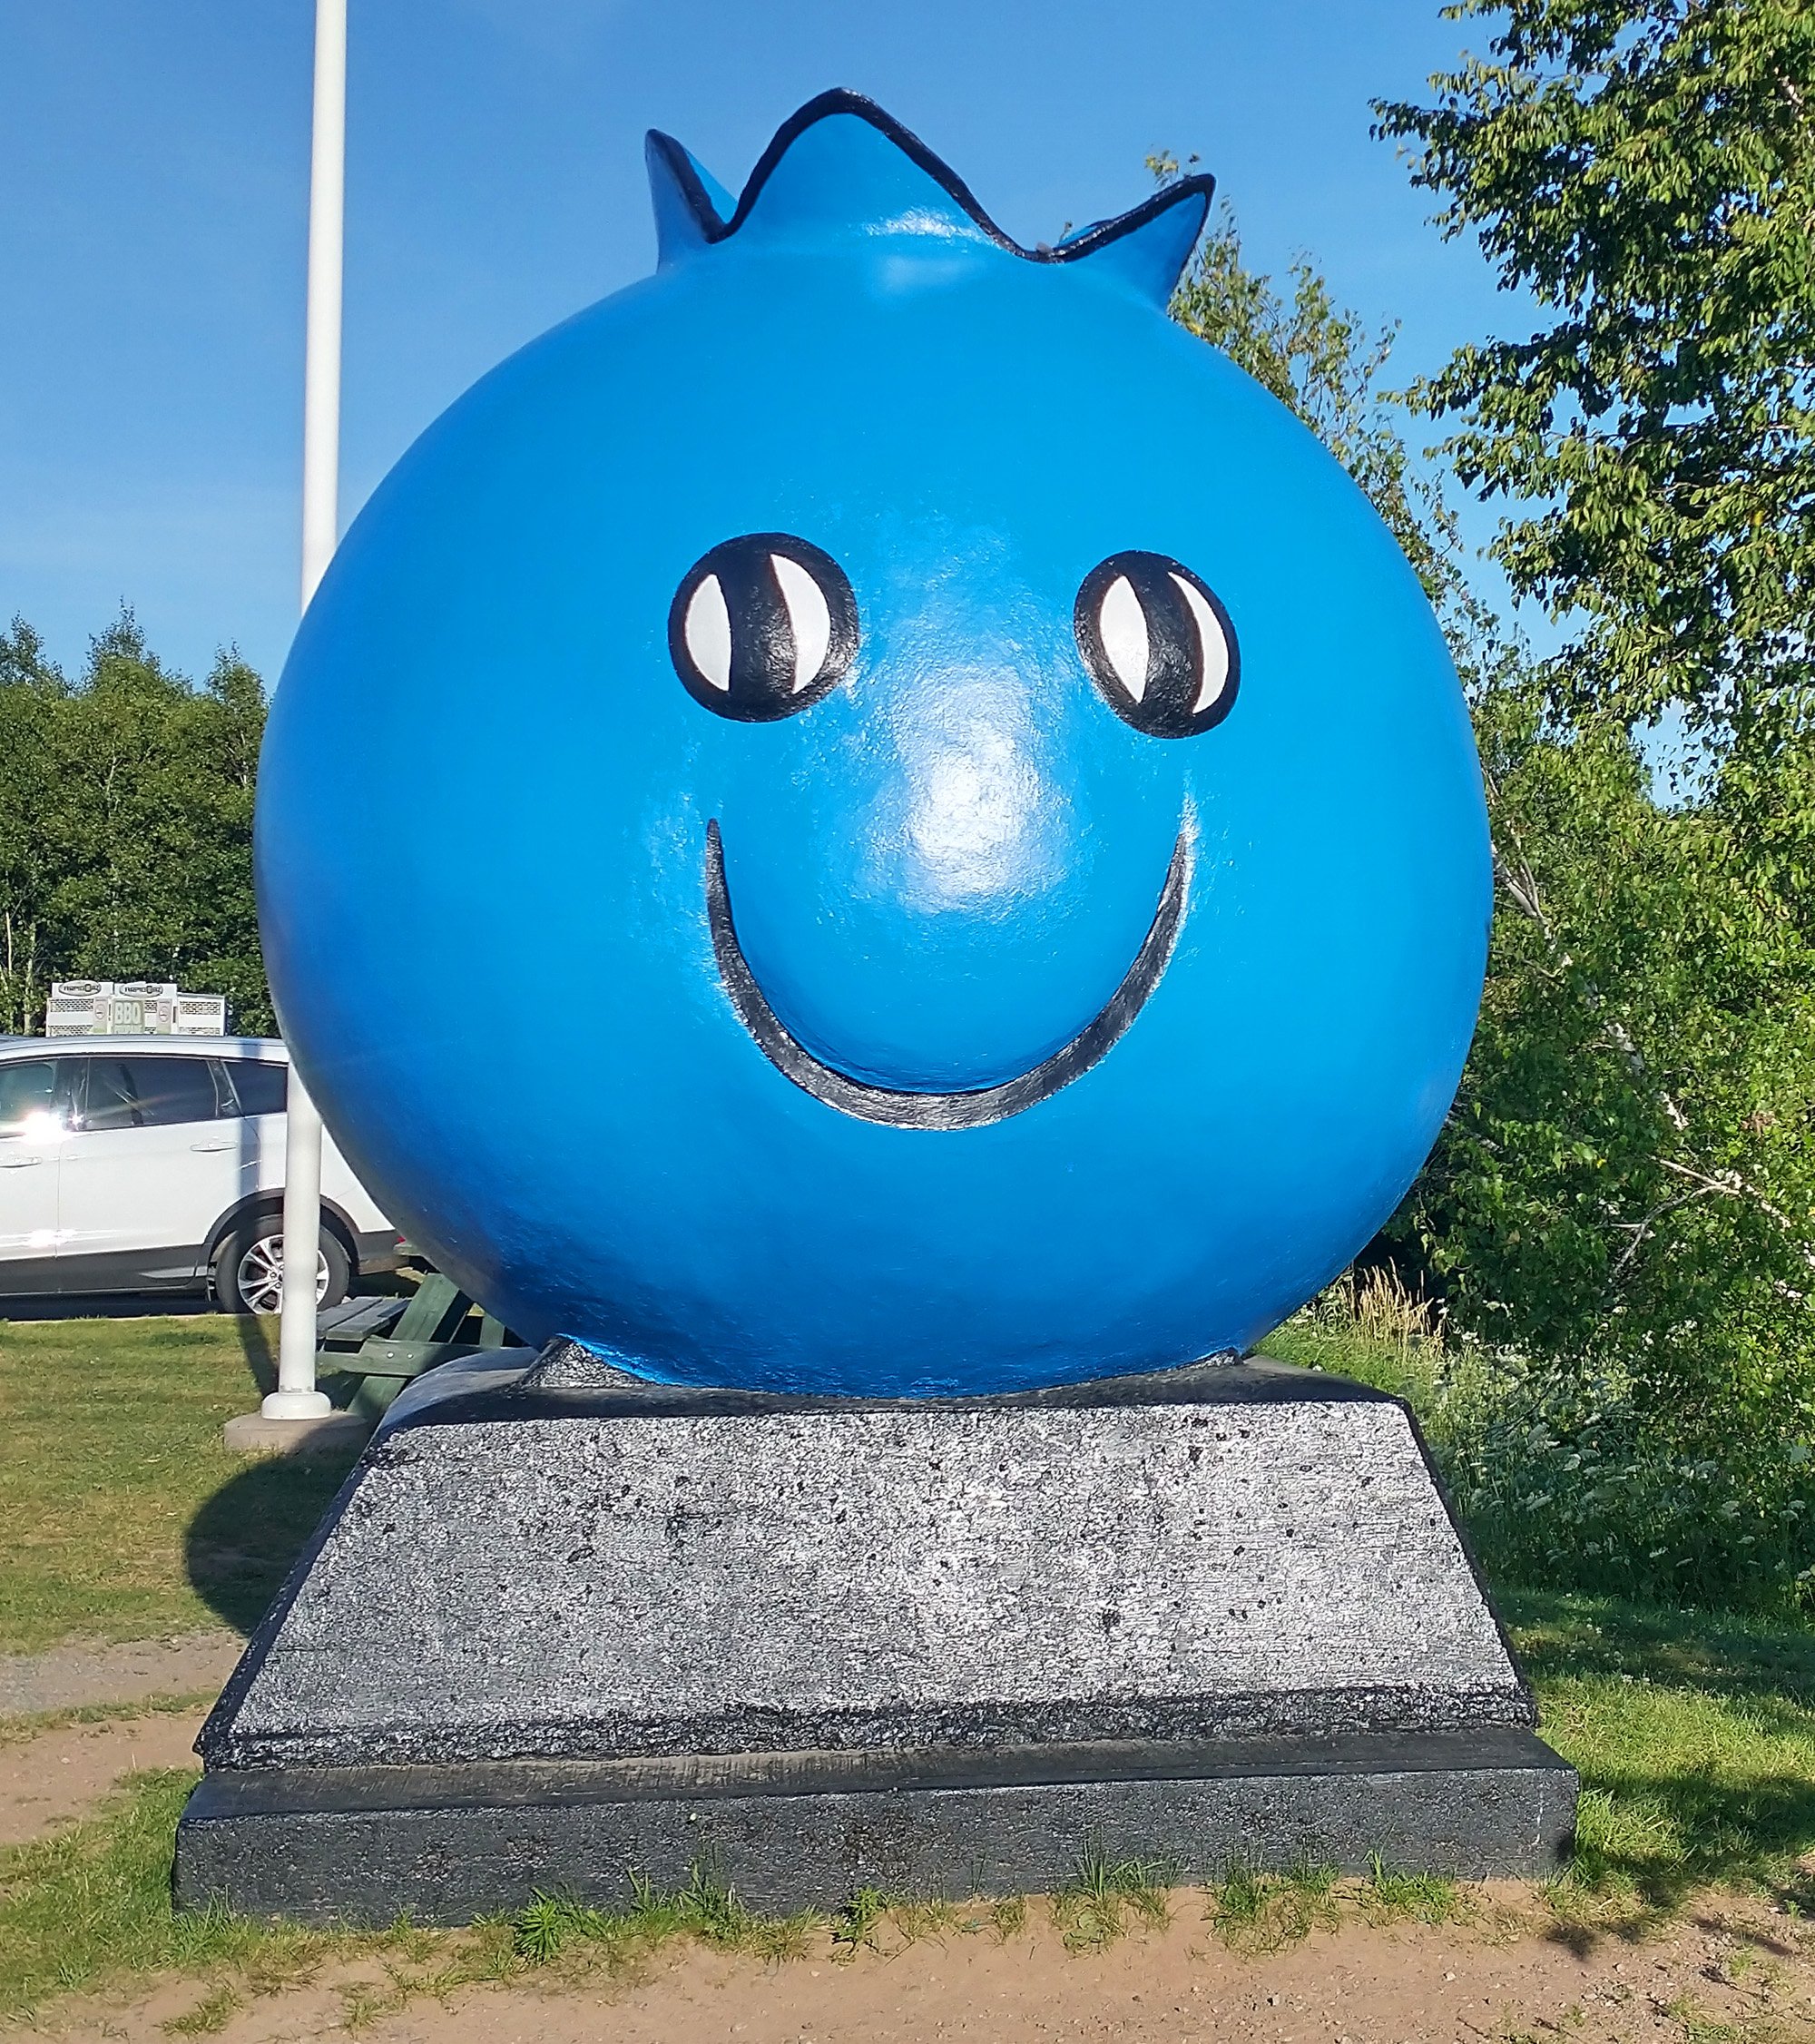 On this same Halifax-Moncton road, you will pass by Oxford, the self-proclaimed "Blueberry Capital of Canada".